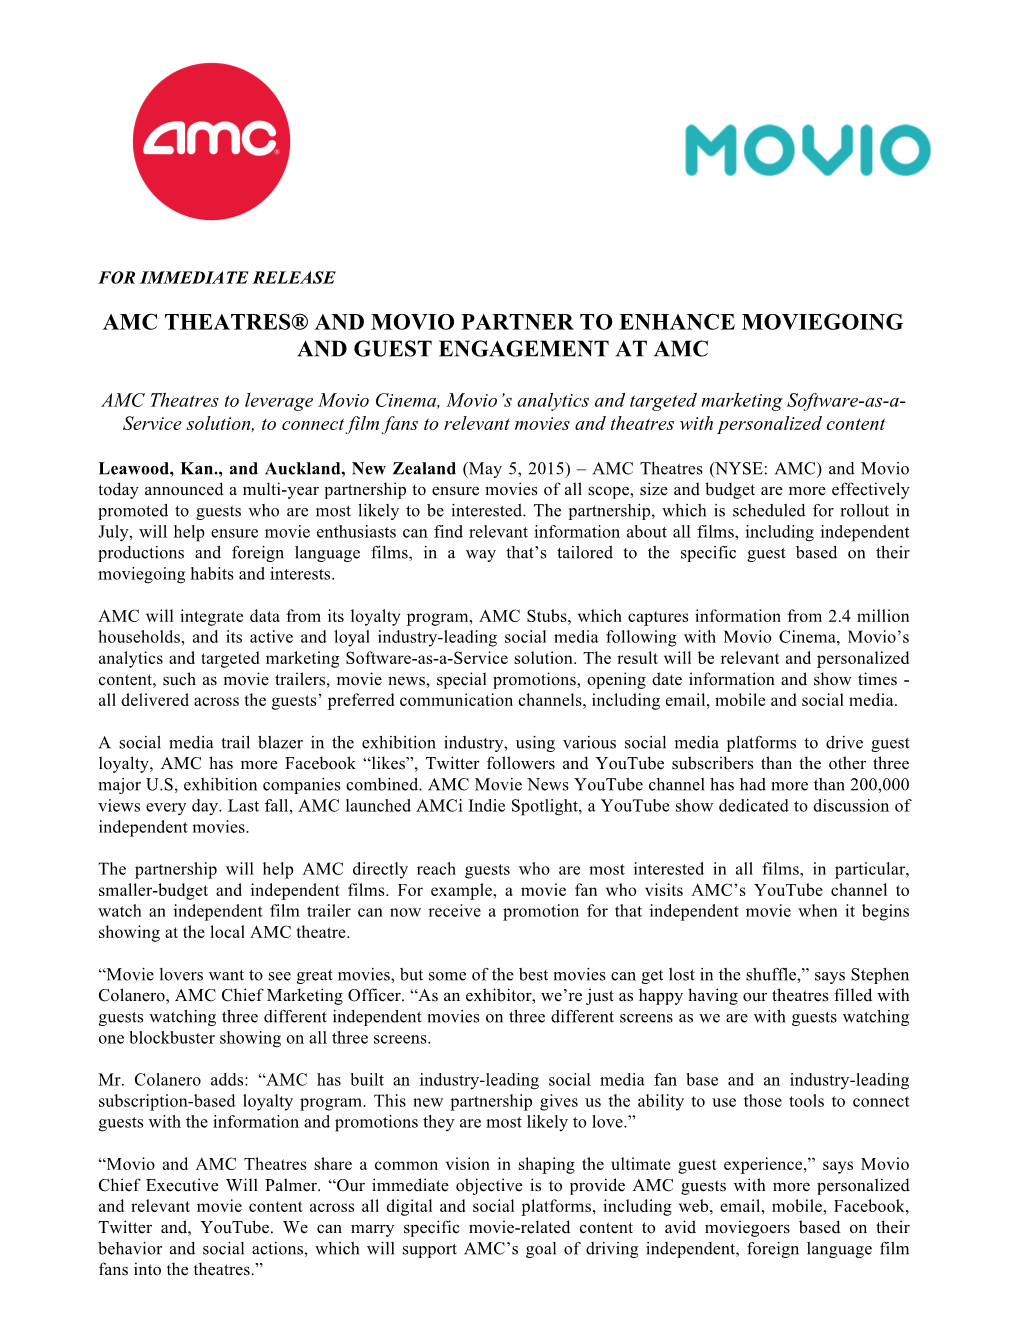 Amc Theatres® and Movio Partner to Enhance Moviegoing and Guest Engagement at Amc